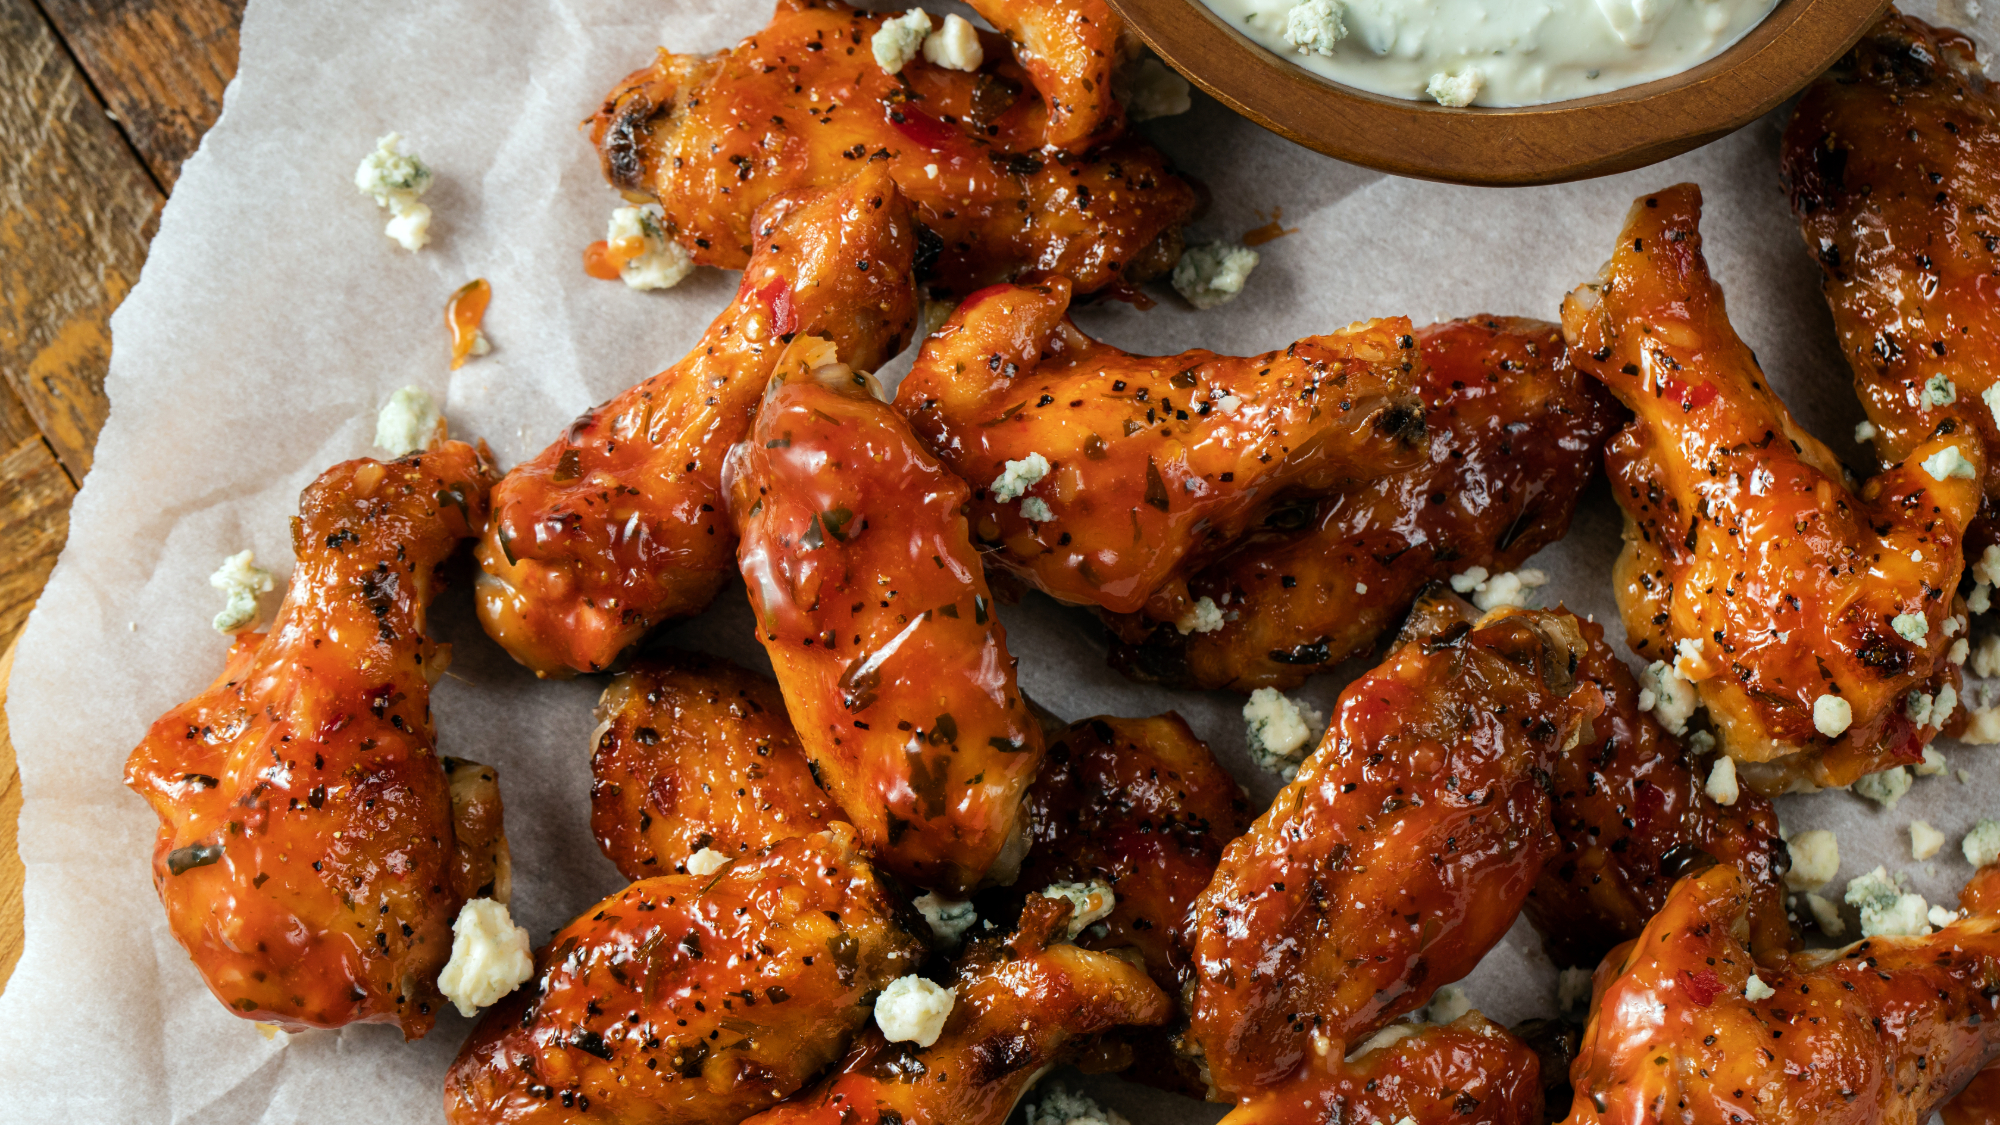 https://mccormick.widen.net/content/55ms14myvs/original/baked_wings_with_blue_cheese_parsley_dip_1308_2000x1125.jpg